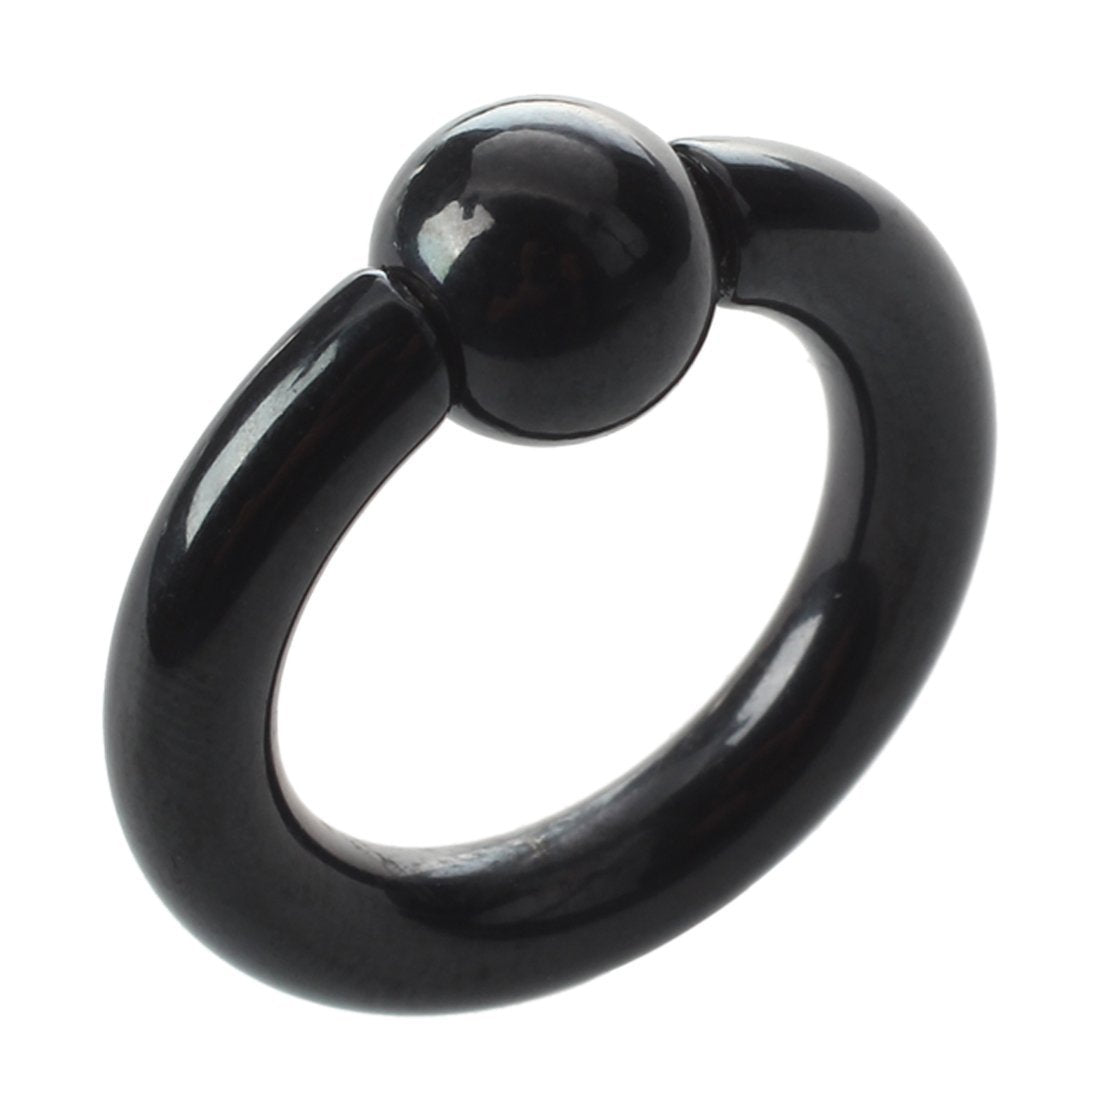 FIFTH CUE Black IP Spring Action Easy Pop Out Captive Bead Ring 316L Surgical Steel - EASY OPEN! - 00G | 0G | 2G | 4G | 6G | 8G